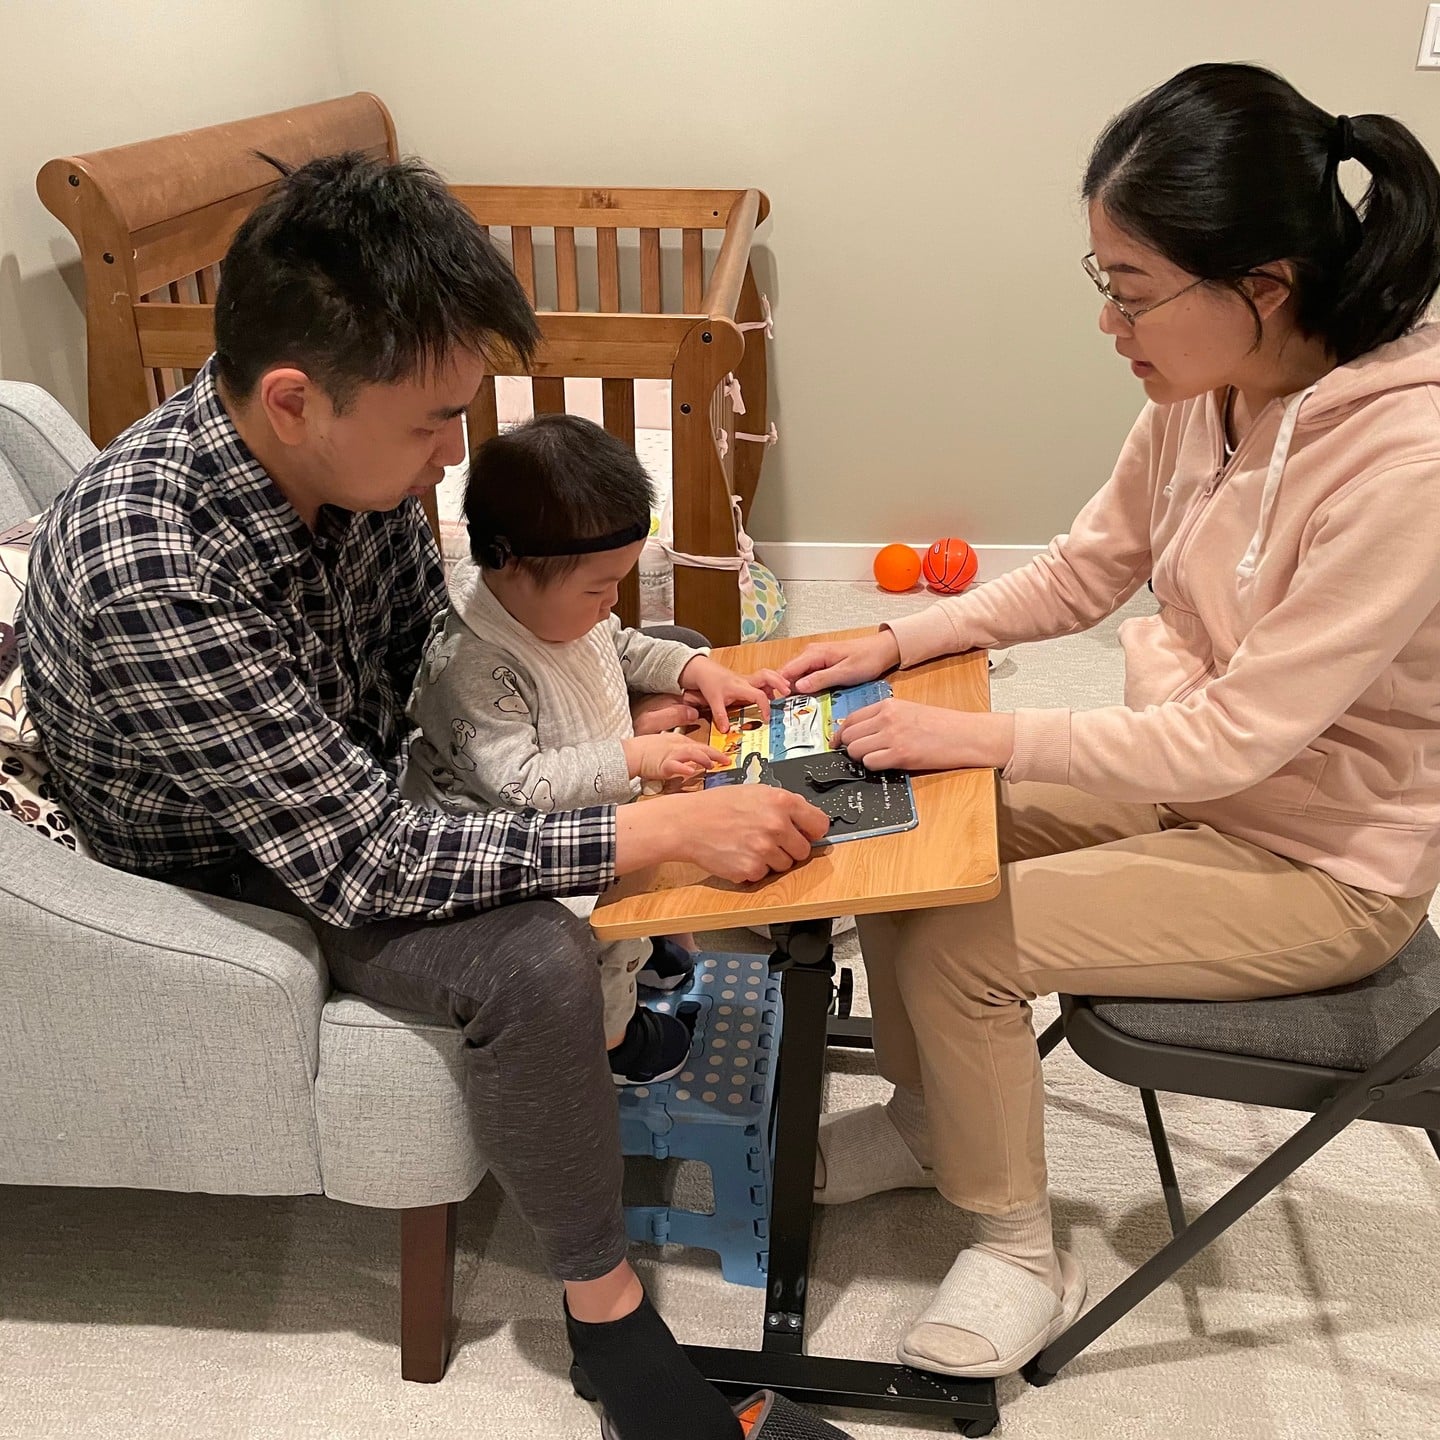 Our family coaching model encourages families to take the lead in their child's development. The family in the photo above is engaging with their child by reading to them.